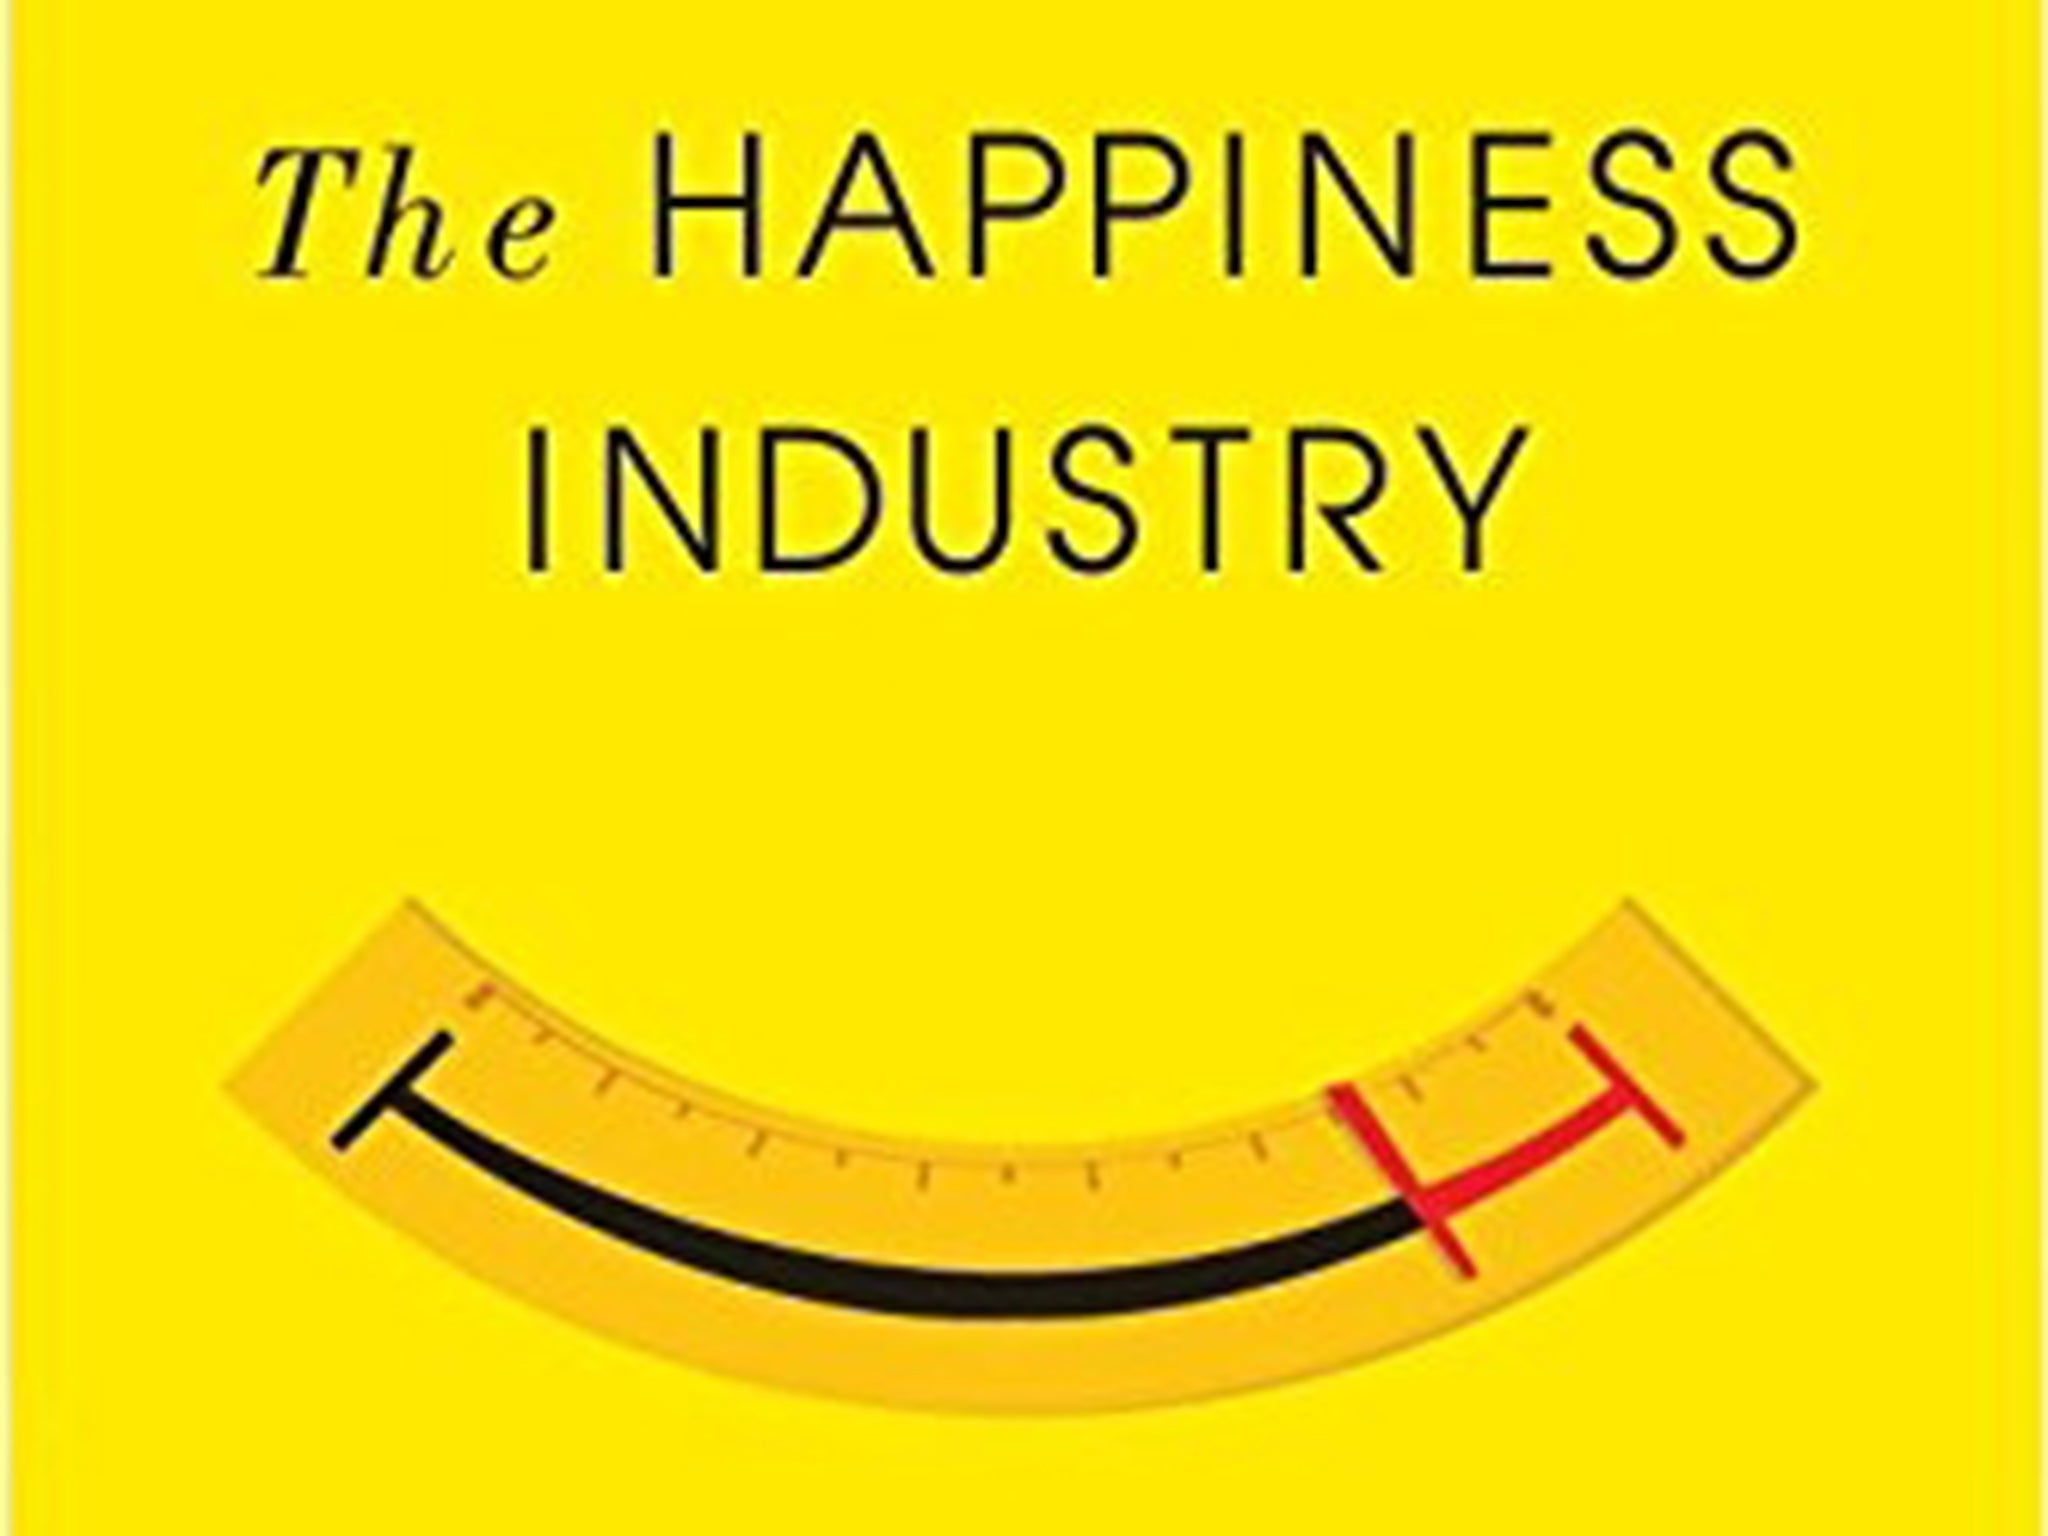 The Happy industry by William Davies